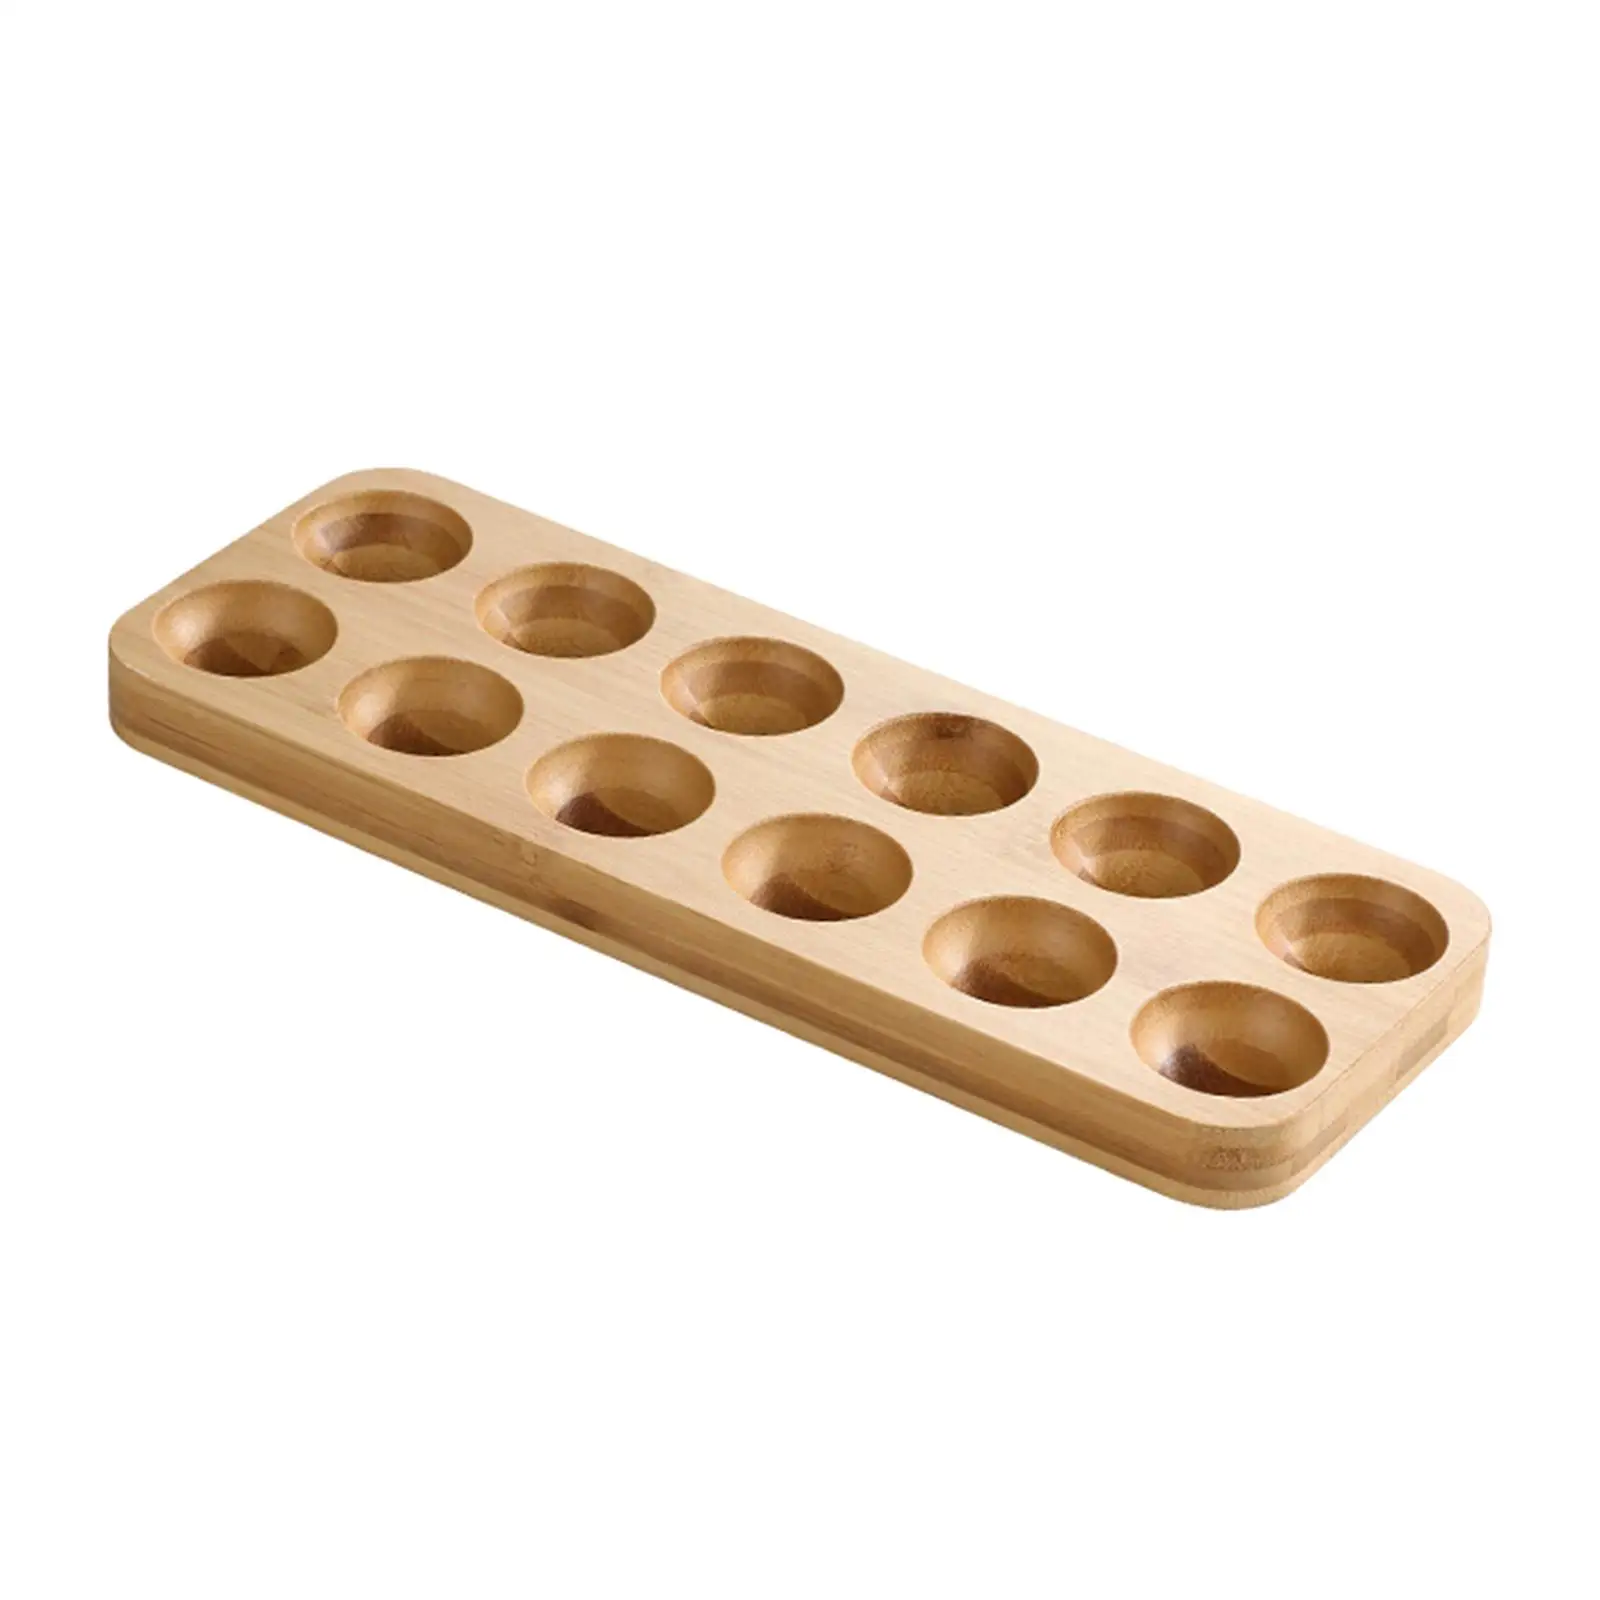 Wooden Egg Holder Rustic Unique Gift Storage Countertop Wood Egg Tray for Household Supermarket Tabletop Restaurants Cabinet